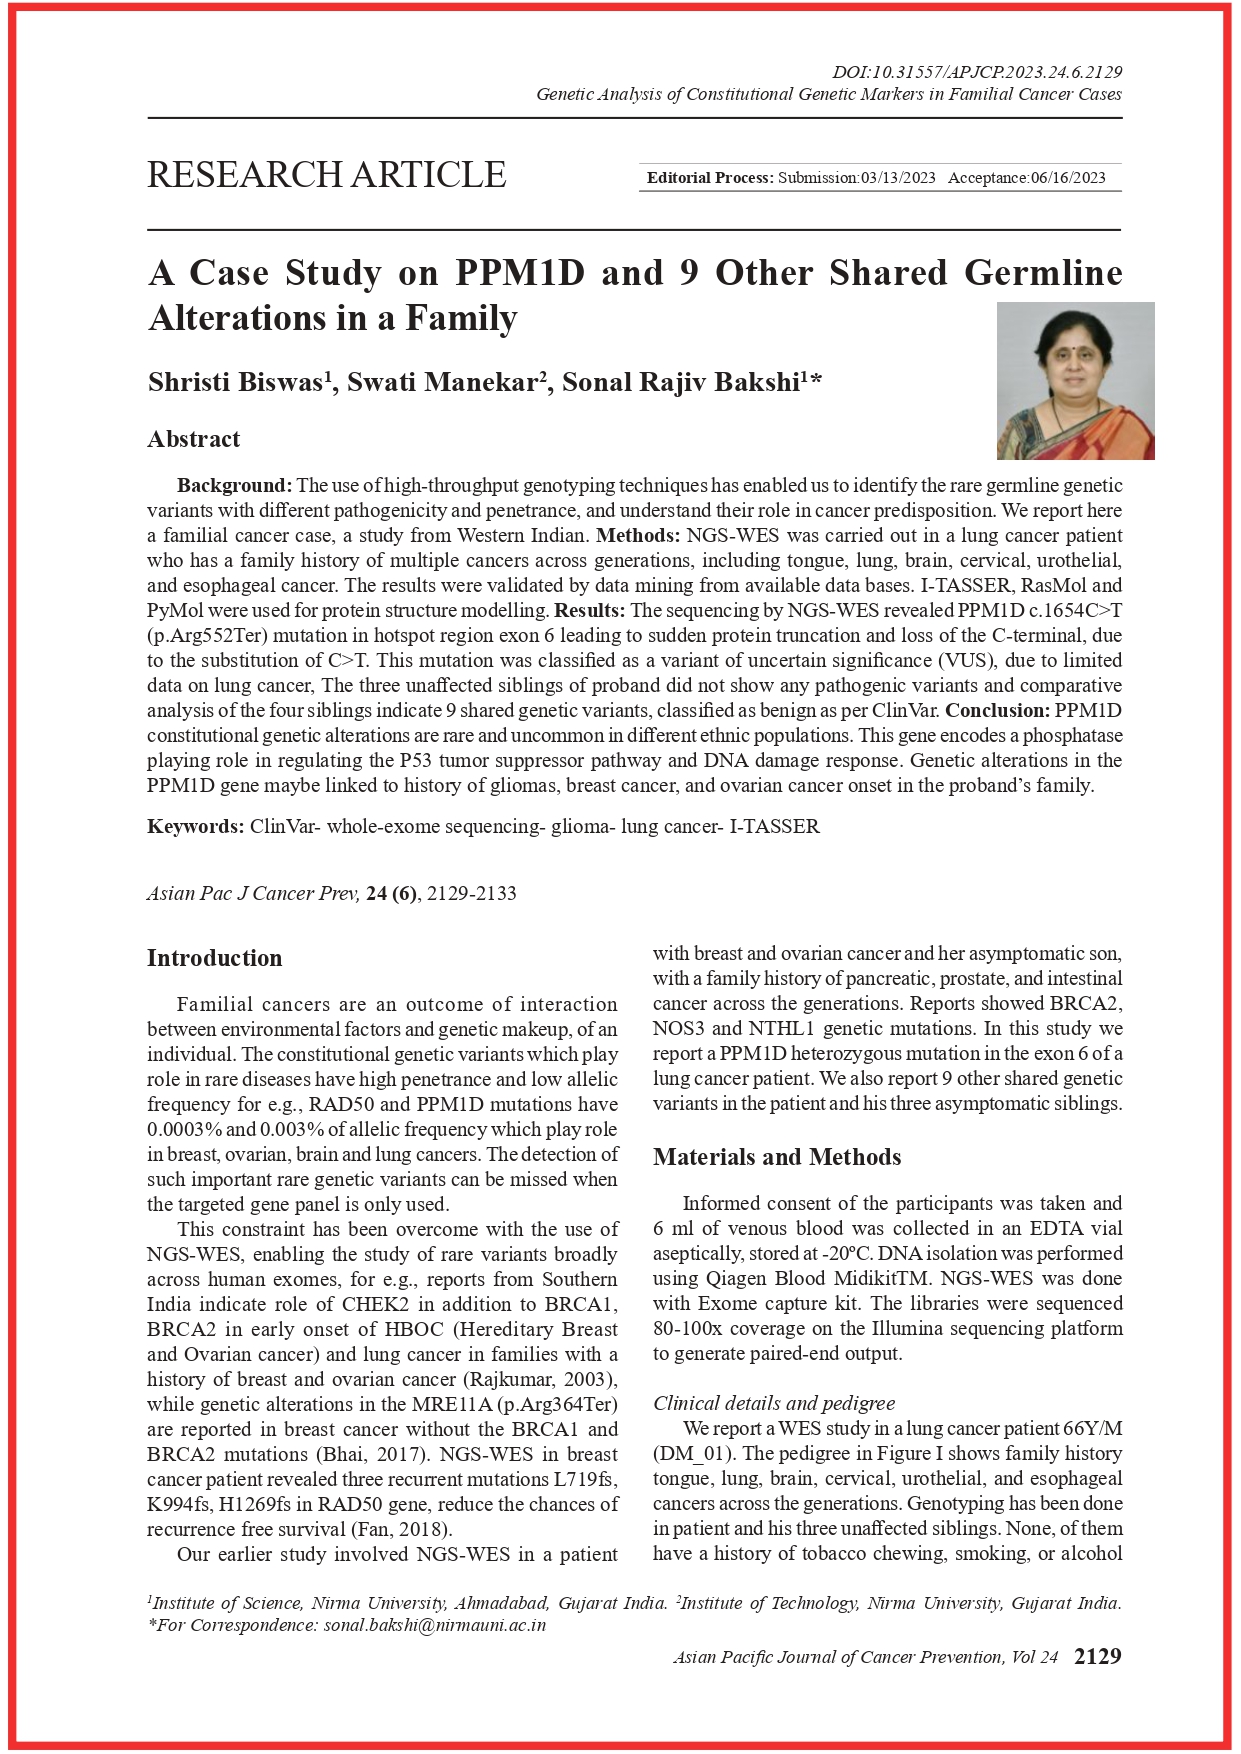 A Case Study on PPM1D and 9 Other Shared Germline Alterations in a Family